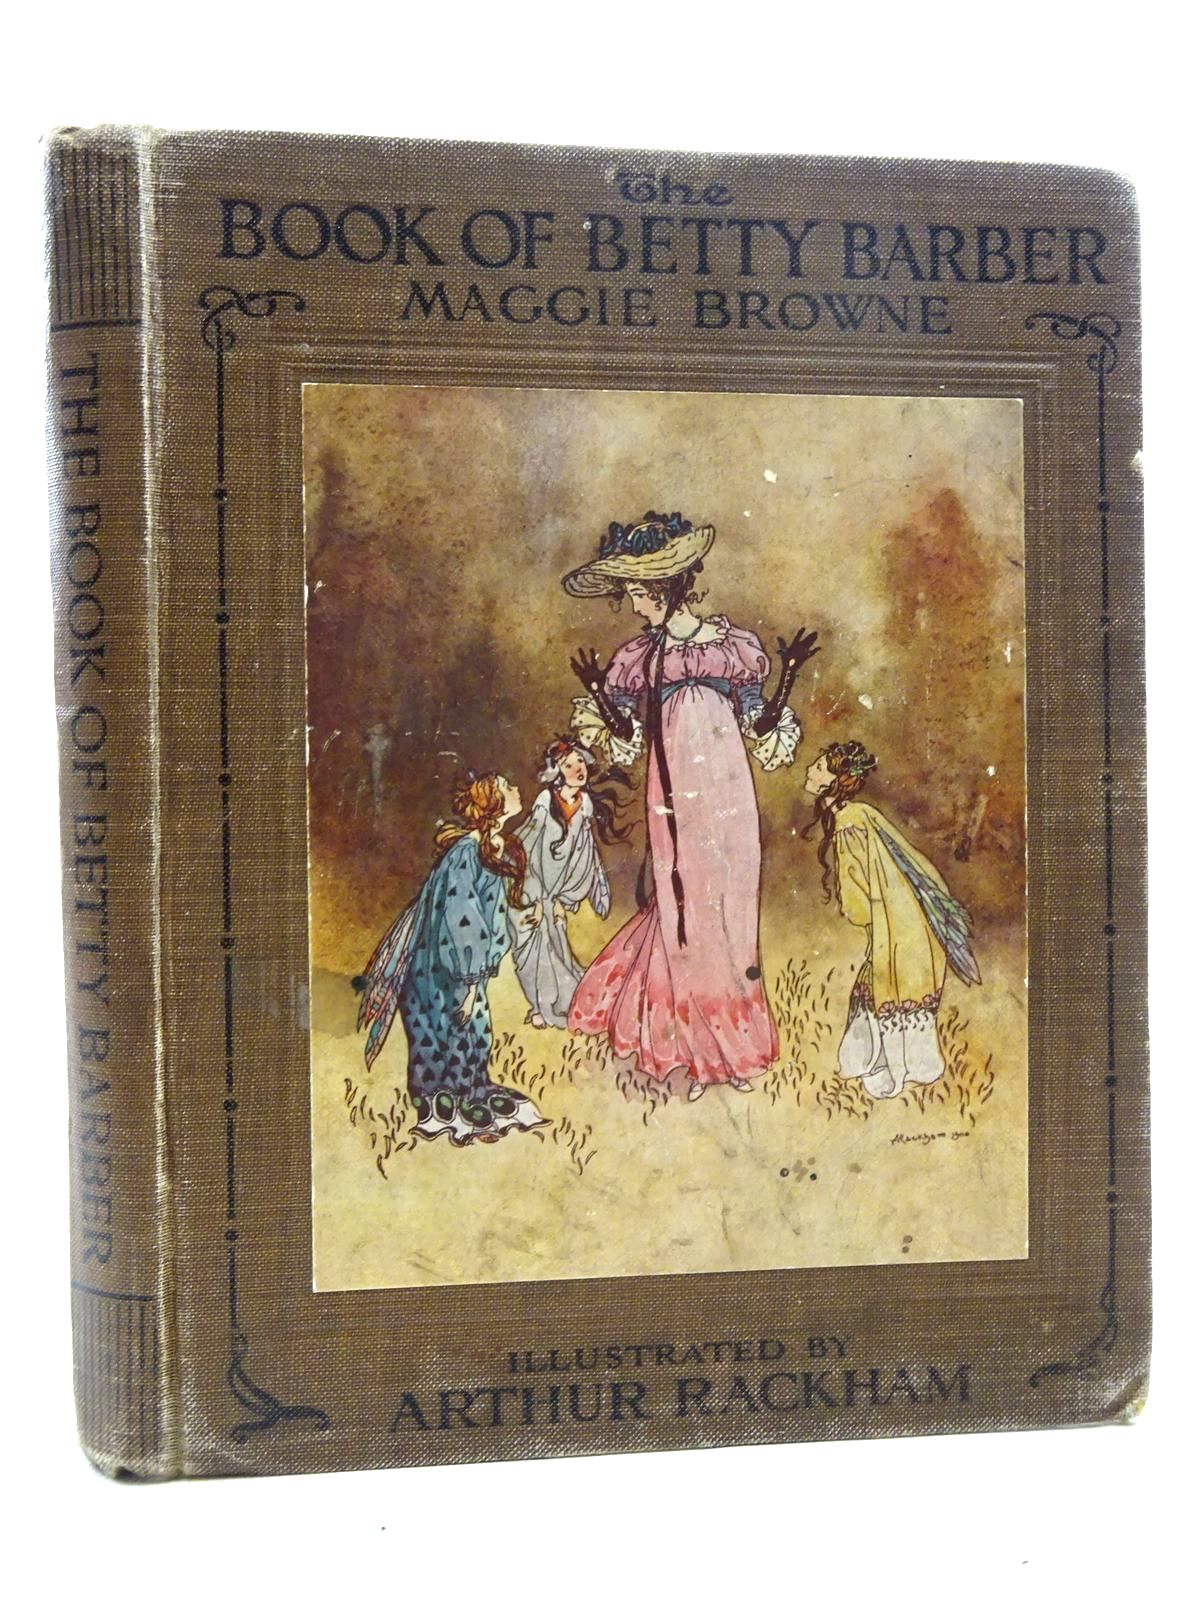 Photo of THE BOOK OF BETTY BARBER written by Browne, Maggie illustrated by Rackham, Arthur
Rountree, Harry published by Duckworth & Co. (STOCK CODE: 2125348)  for sale by Stella & Rose's Books